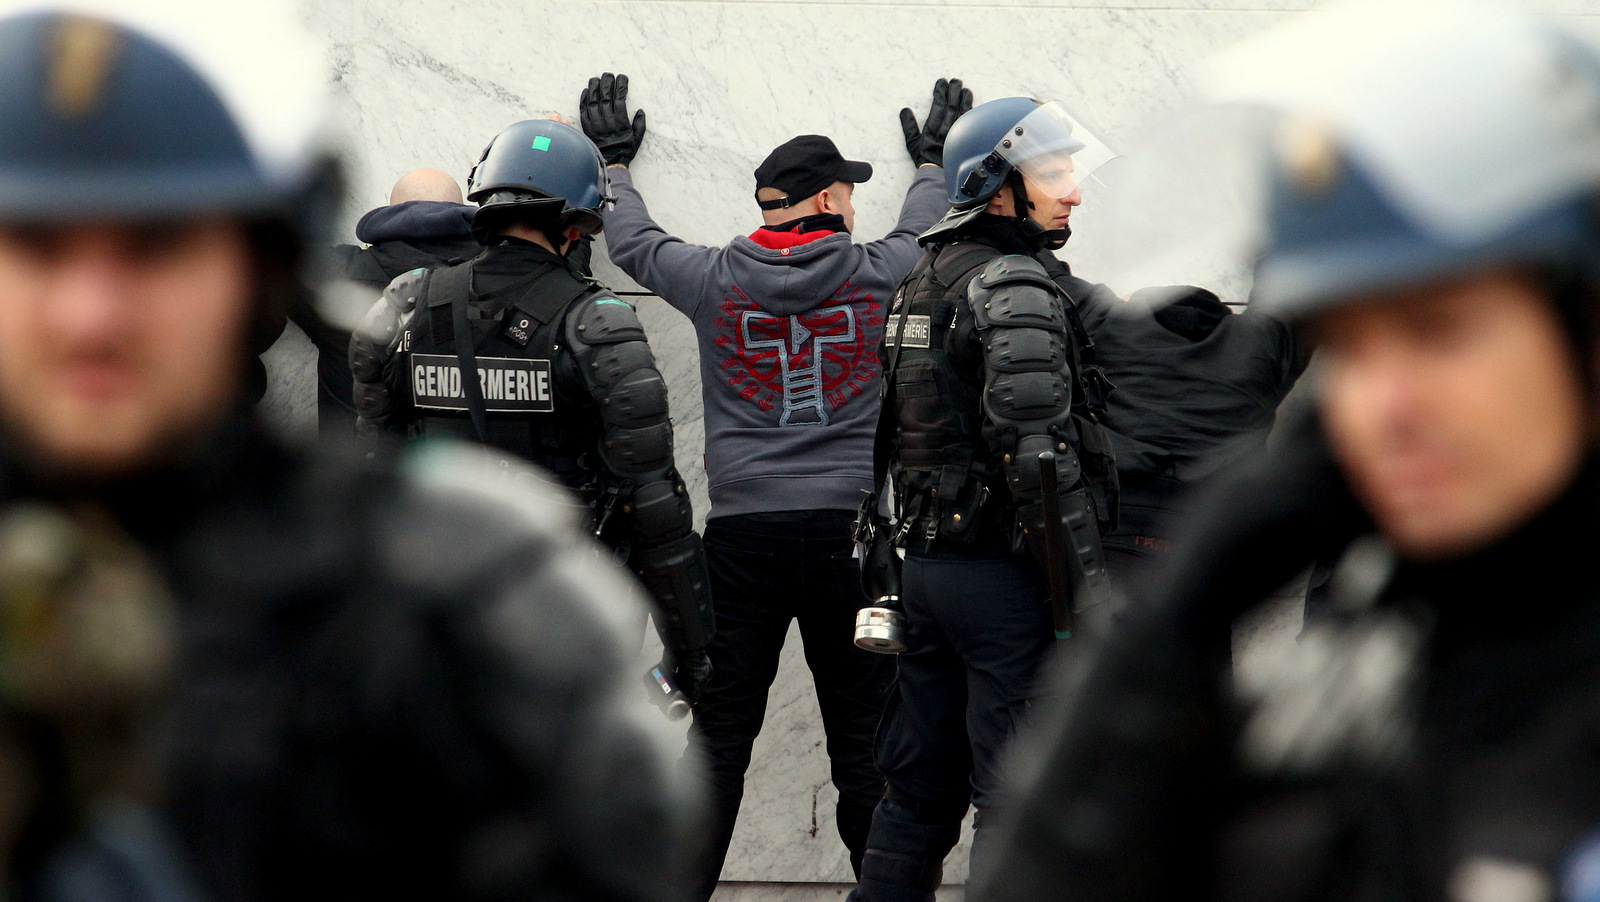 French police officers detain a man during a demonstration of extreme-right activists and supporters of PEGIDA (Patriotic Europeans against the Islamization of the West), in front of the train station in Calais, northern France, Saturday, Feb. 6, 2016. Hundreds of extreme-right activists demonstrated Saturday to "save" Calais from homeless migrants inundating the French port city in hopes of crossing the English Channel to Britain. (AP Photo/Michel Spingler)